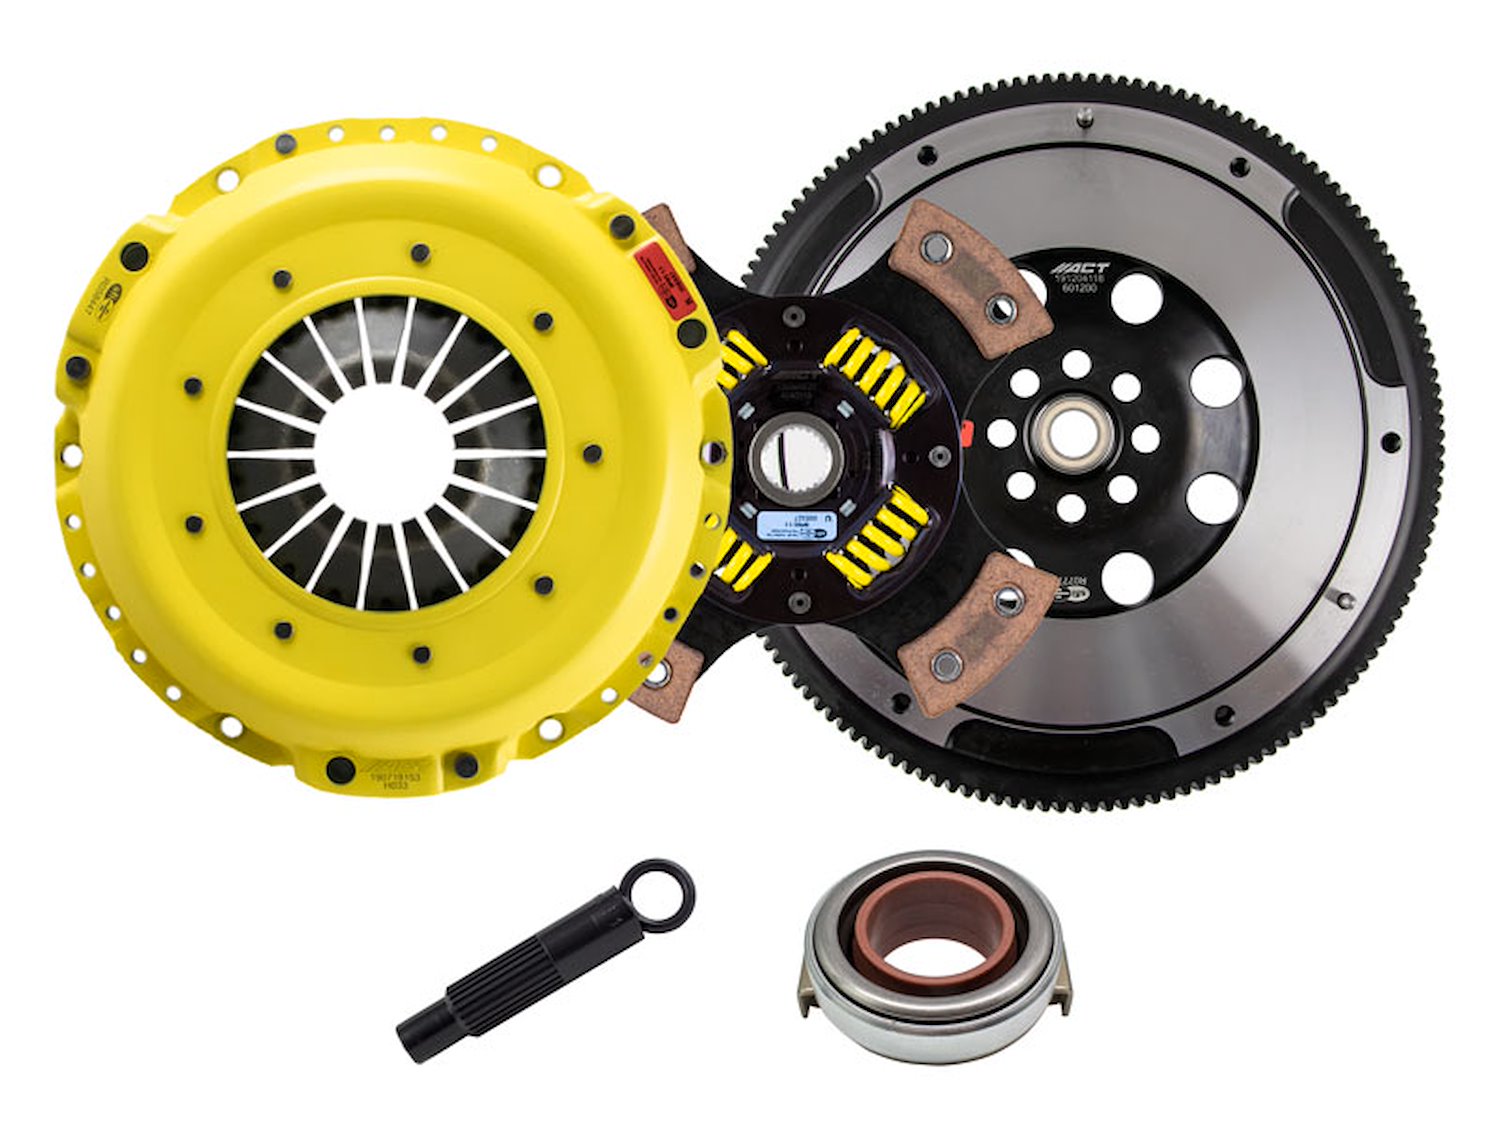 HD/Race Sprung 4-Pad Transmission Clutch Kit Fits Select Acura/Honda